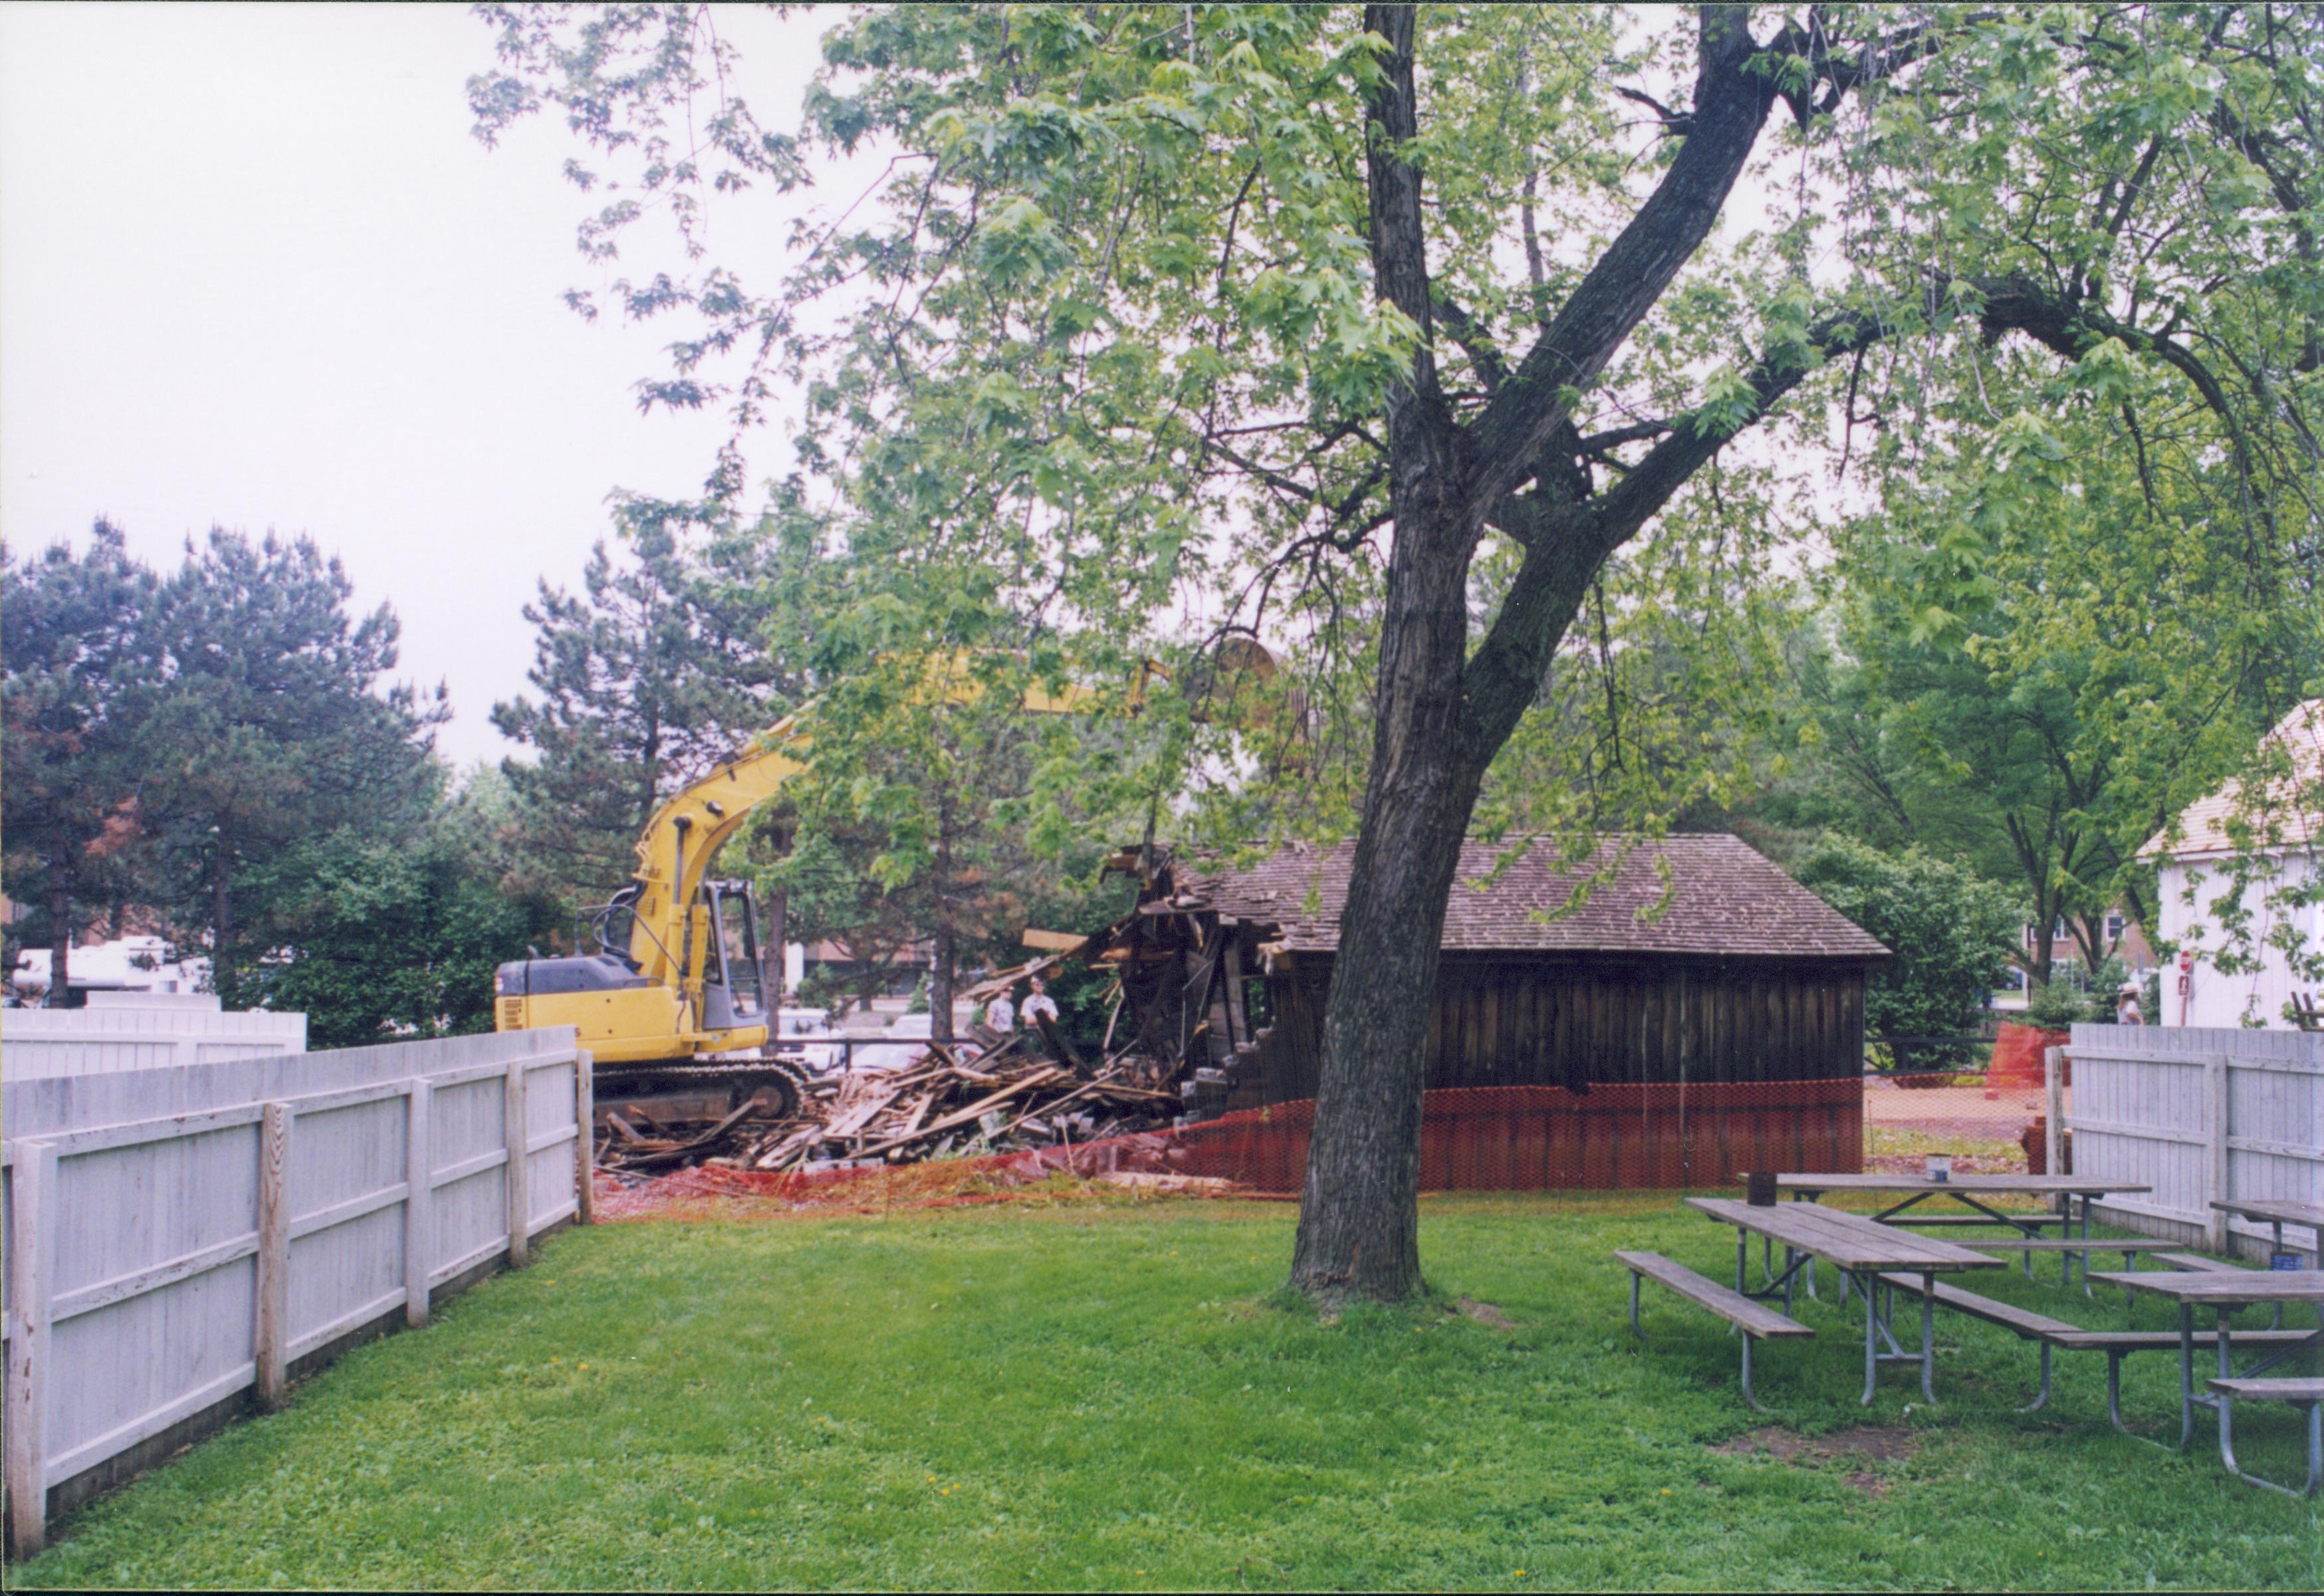 Maintenance Shed removal - Sprigg shed tear down commences on non-historic barn. Maintenance Work Leader Vee Pollock operates crane. New Corneau Barn in background far right. Visitor Parking lot in background with visitors just visible behind shed. Looking West from Sprigg backyard. Sprigg, shed, demolition, Corneau Barn, parking lot